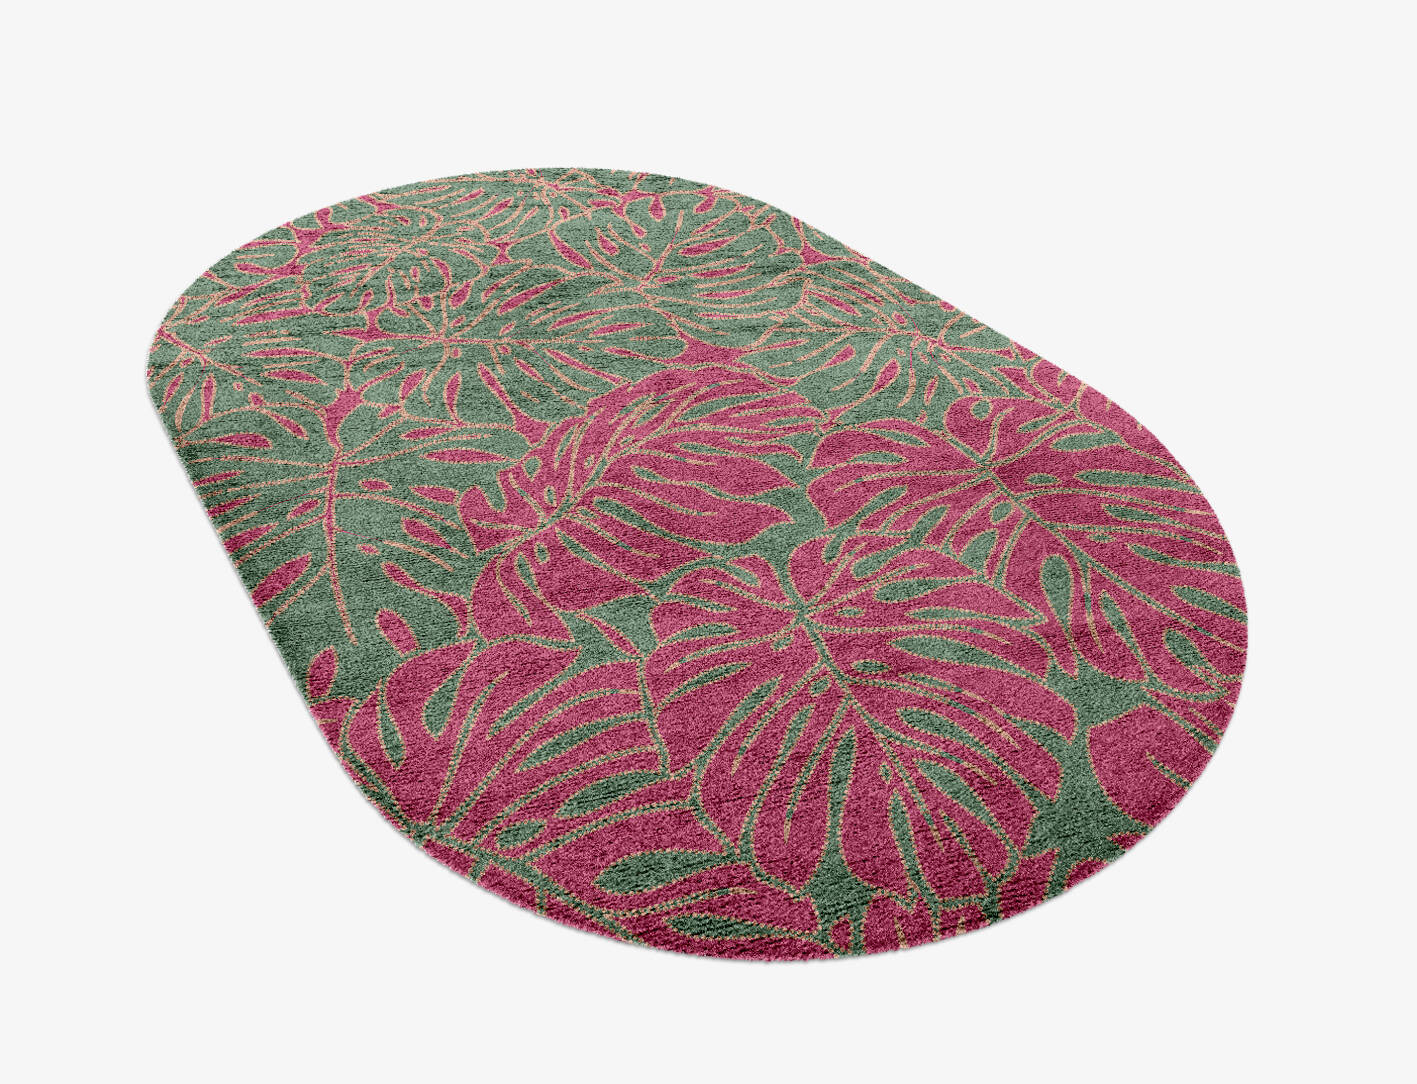 Foliage Floral Capsule Hand Knotted Bamboo Silk Custom Rug by Rug Artisan